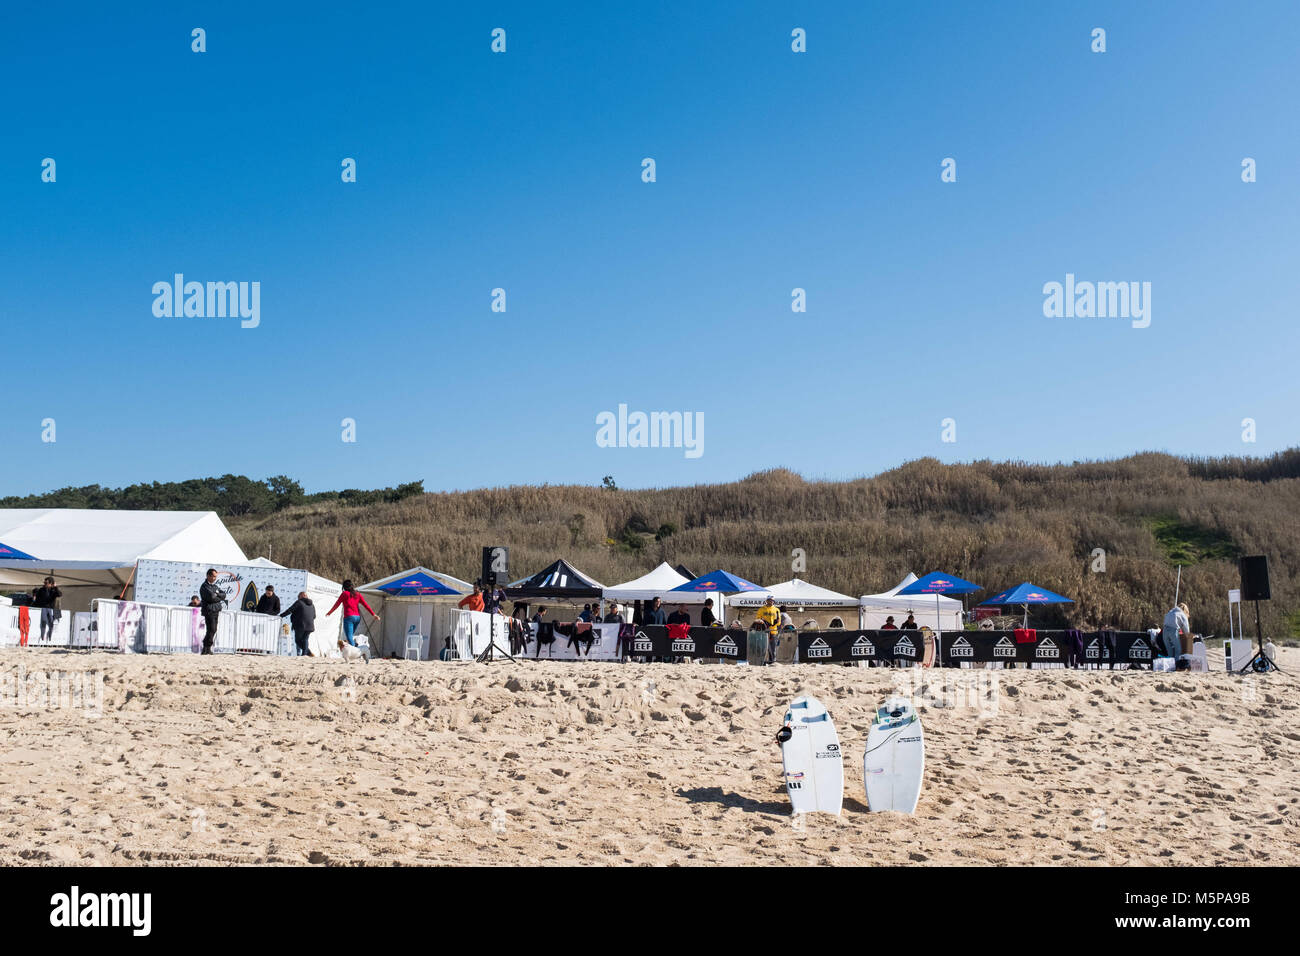 February 24, 2018 - NazarÃ, Leiria, Portugal - General view of the Praia do Norte beach where the Capitulo Perfeito event was hosted..An event that brings together some of the best free surfers in the country and the world in a tube competition at Praia do Norte, NazarÃ©...It happened on the 24th of February and the winner was William Aliotti. (Credit Image: © Capitulo Perfeito-002.jpg/SOPA Images via ZUMA Wire) Stock Photo